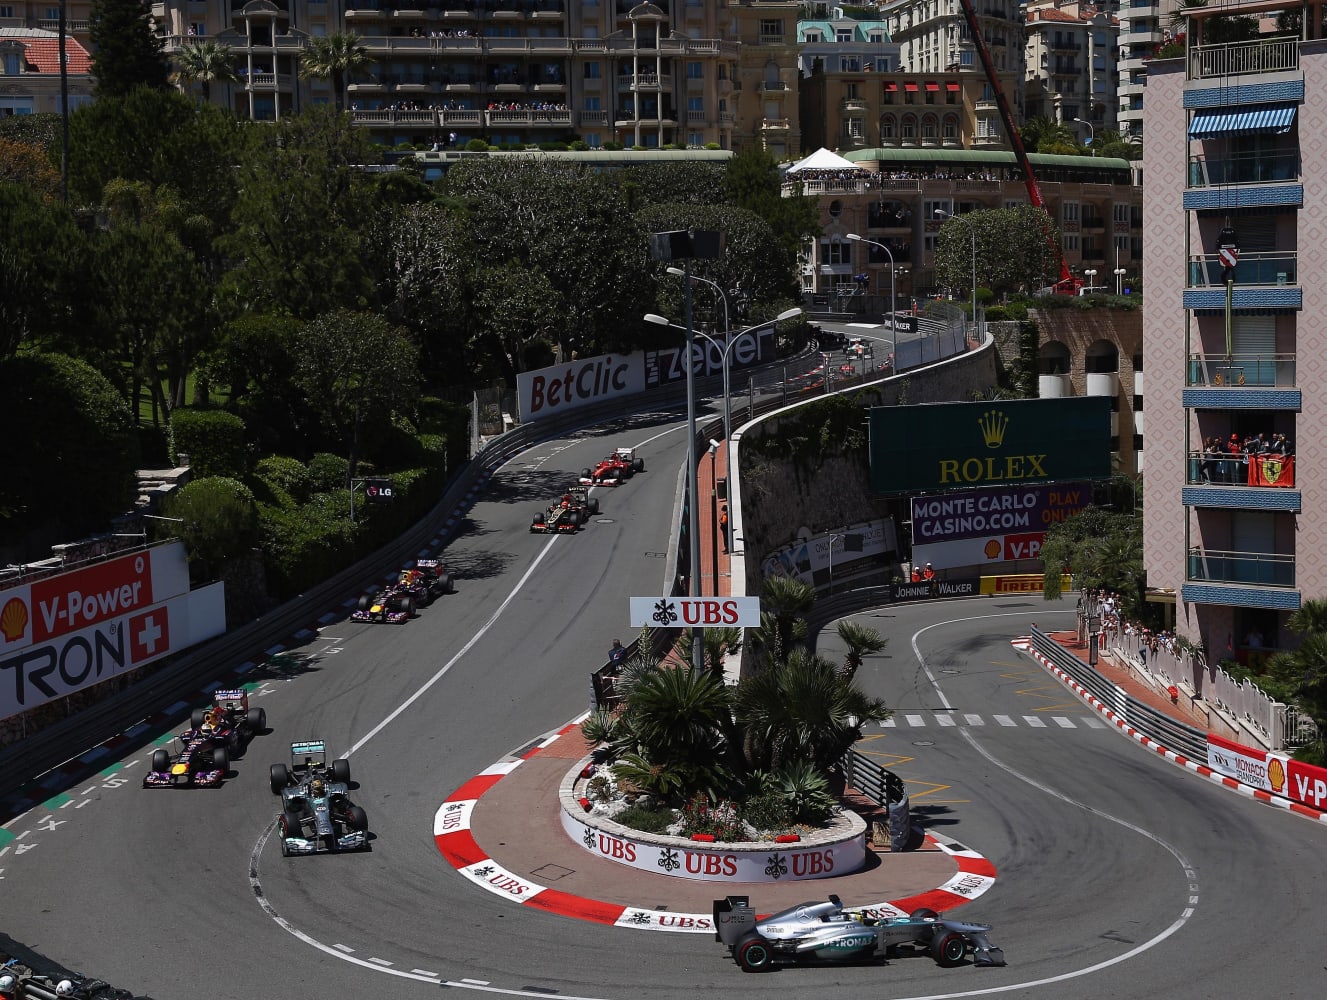 Best F1 Street Racing Circuits In The World: The Top 10